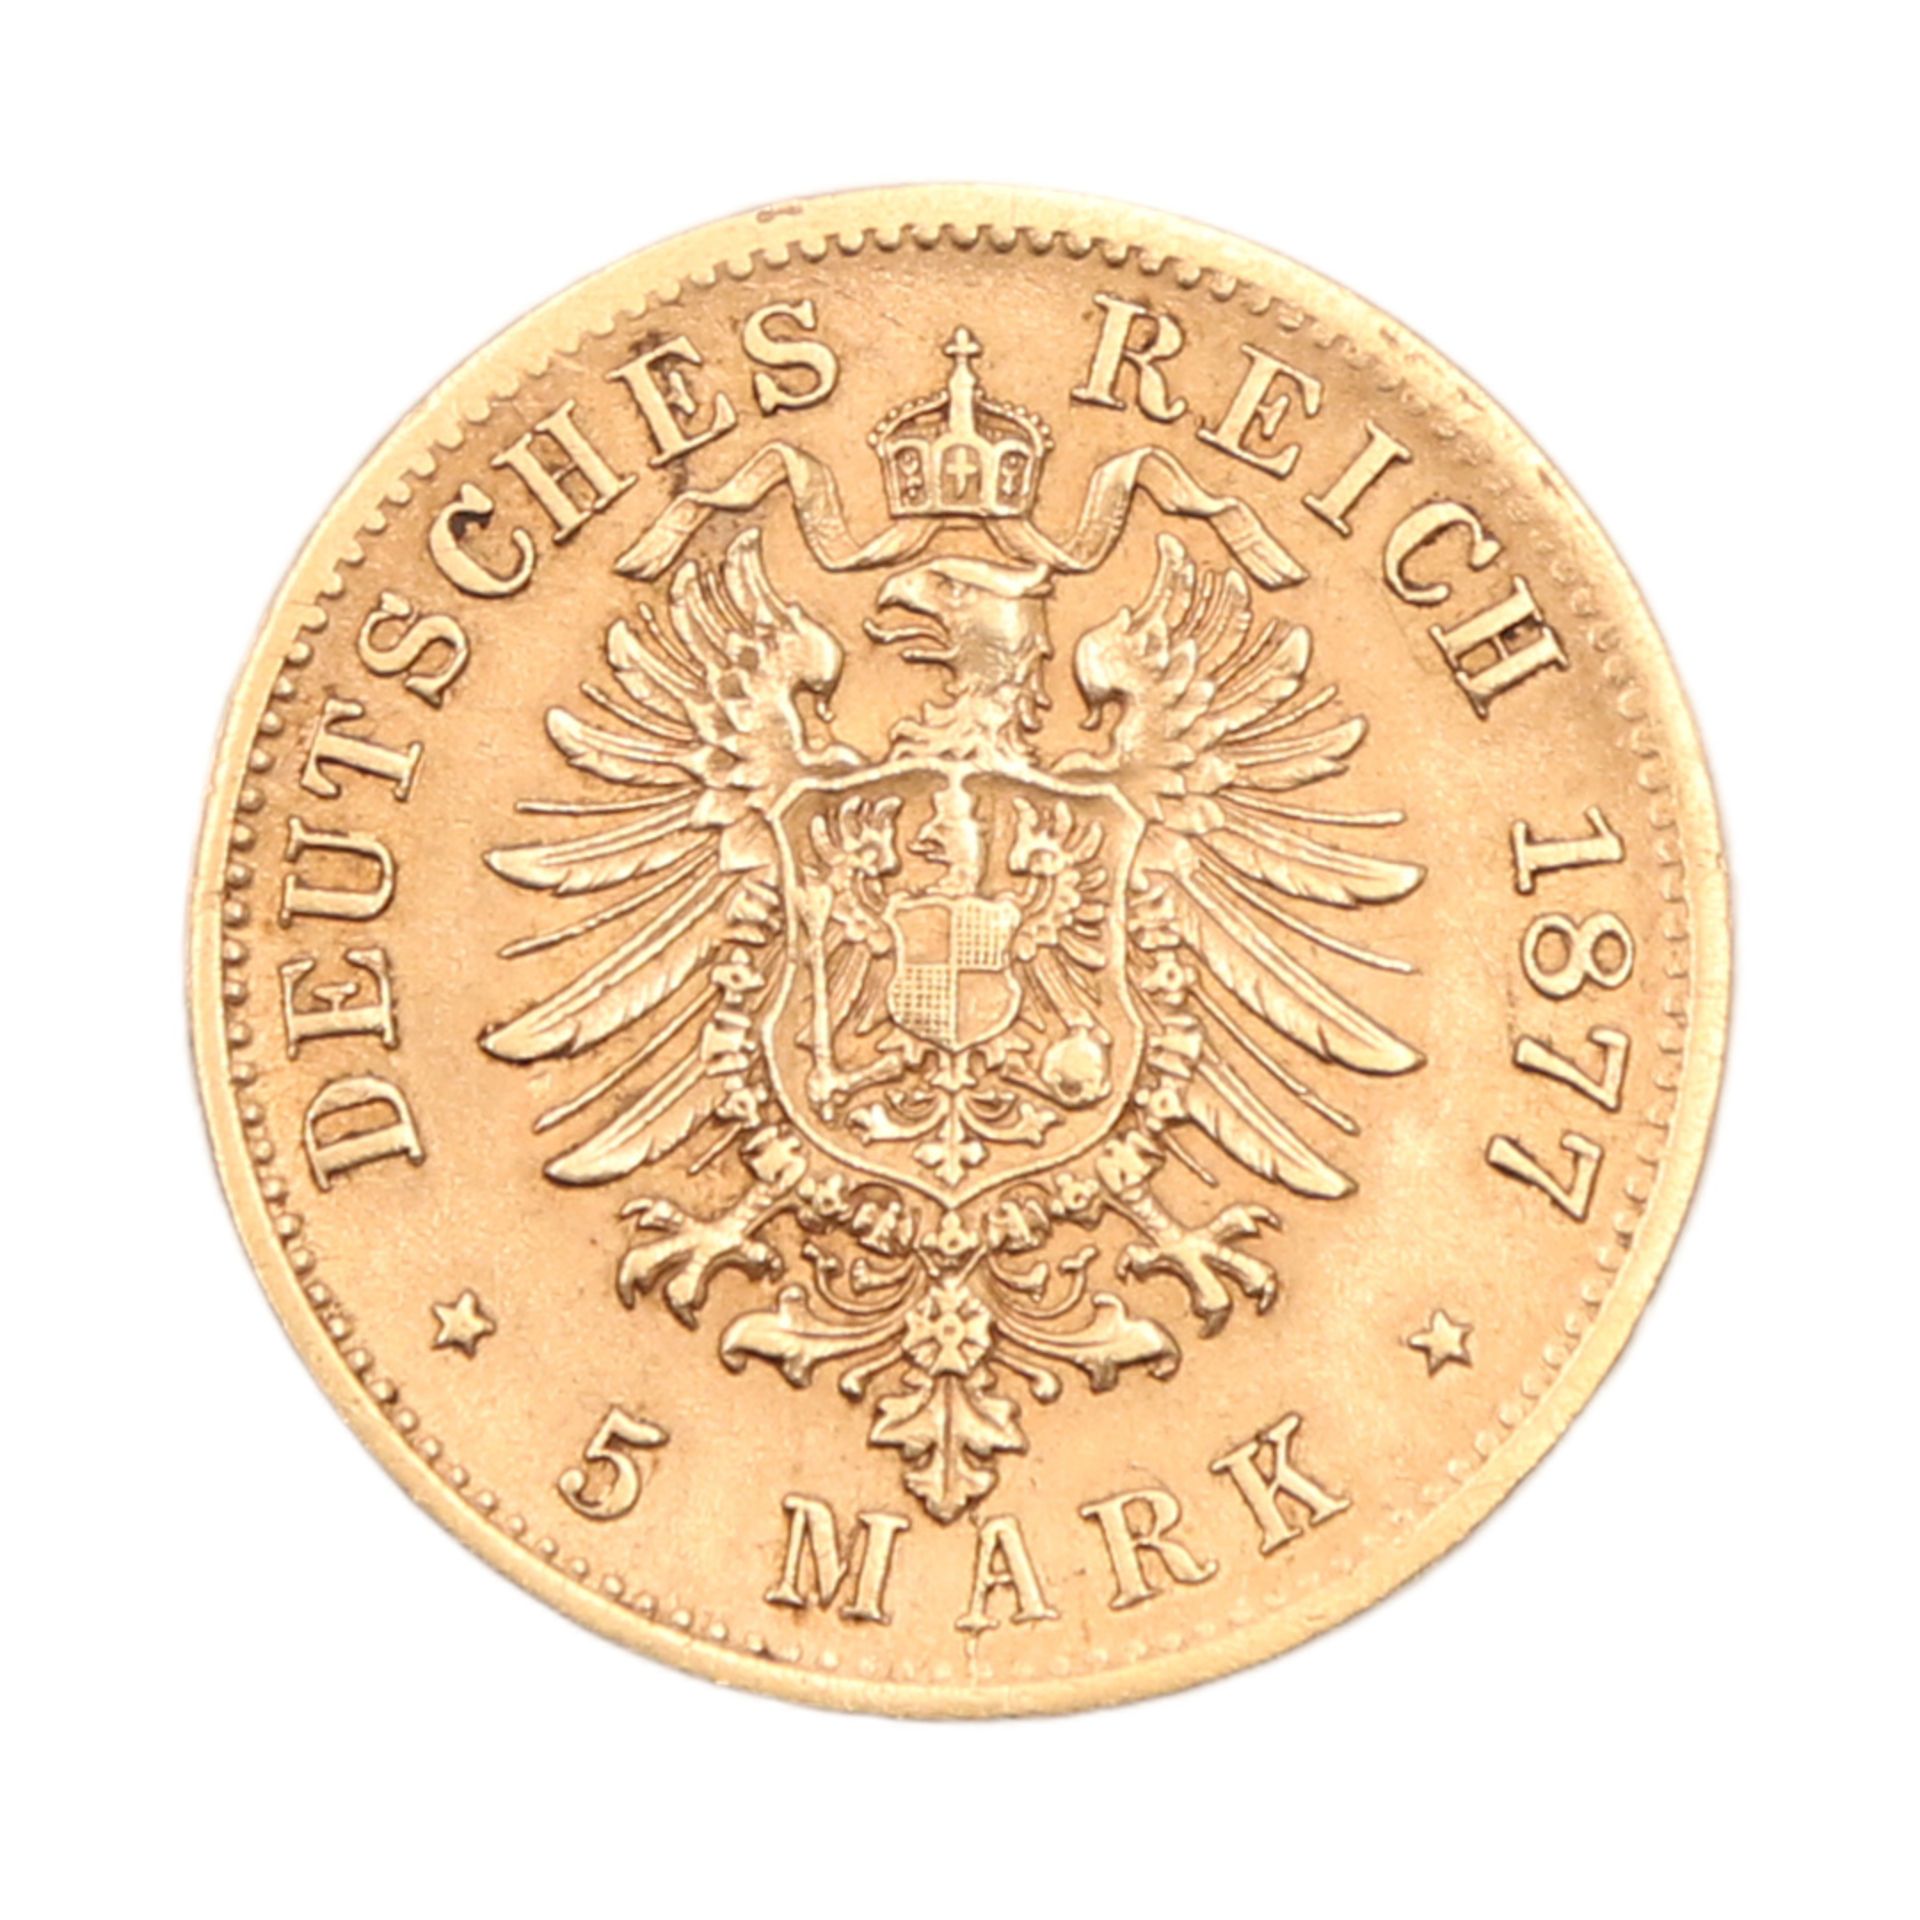 5 Mark Reichsgold coin, Saxony, 1877 - Image 2 of 2